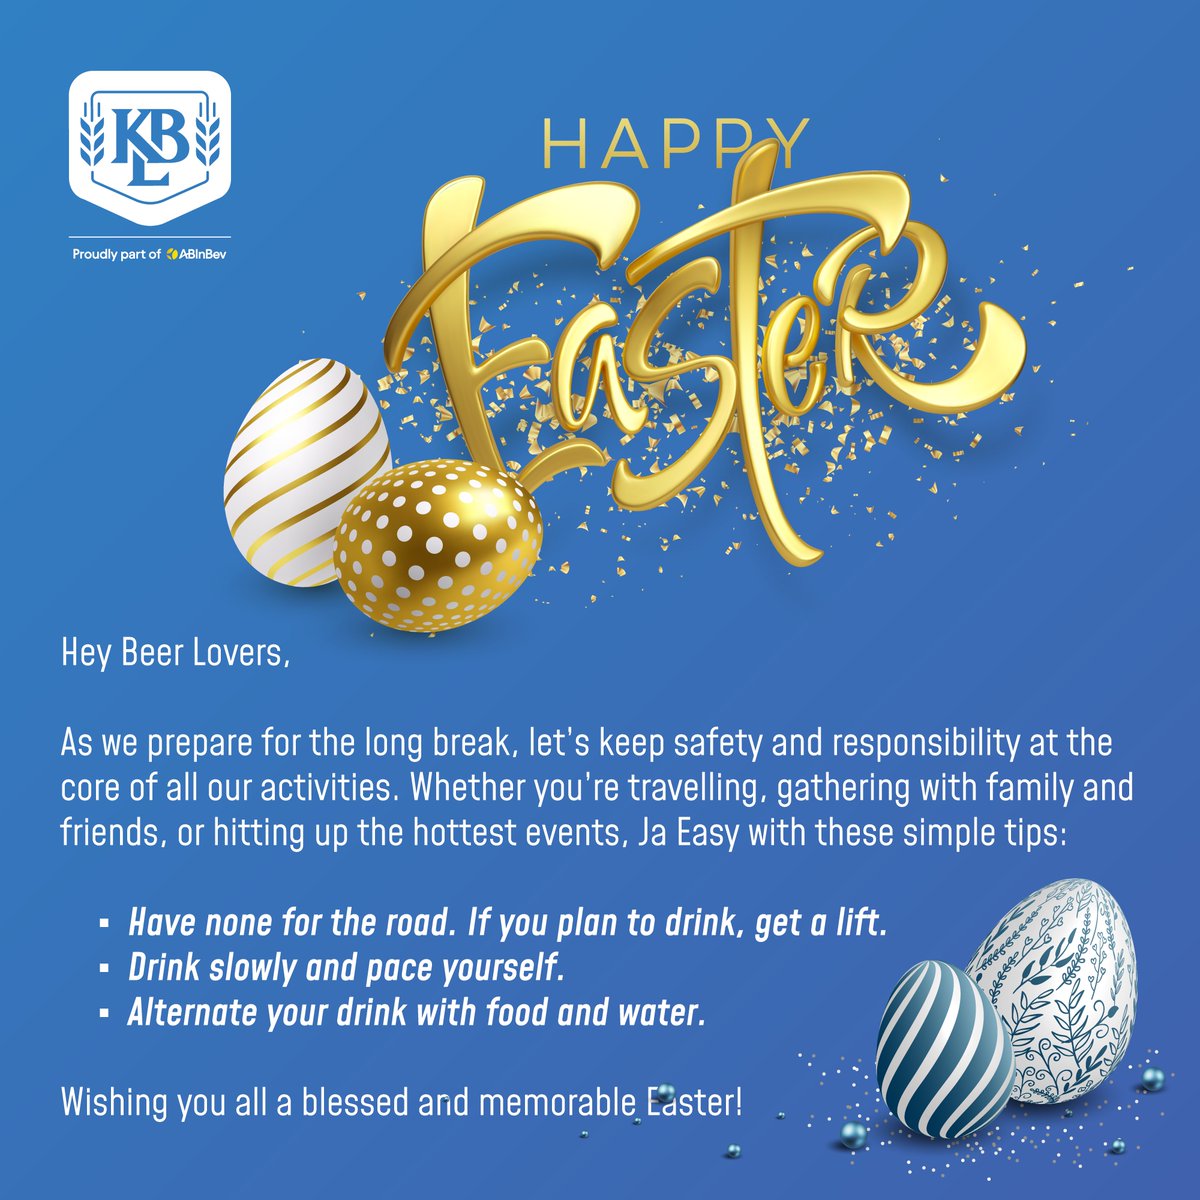 Wishing you a safe and memorable long weekend. Happy Easter!
#HappyEaster #JaEasy #FutureWithMoreCheers